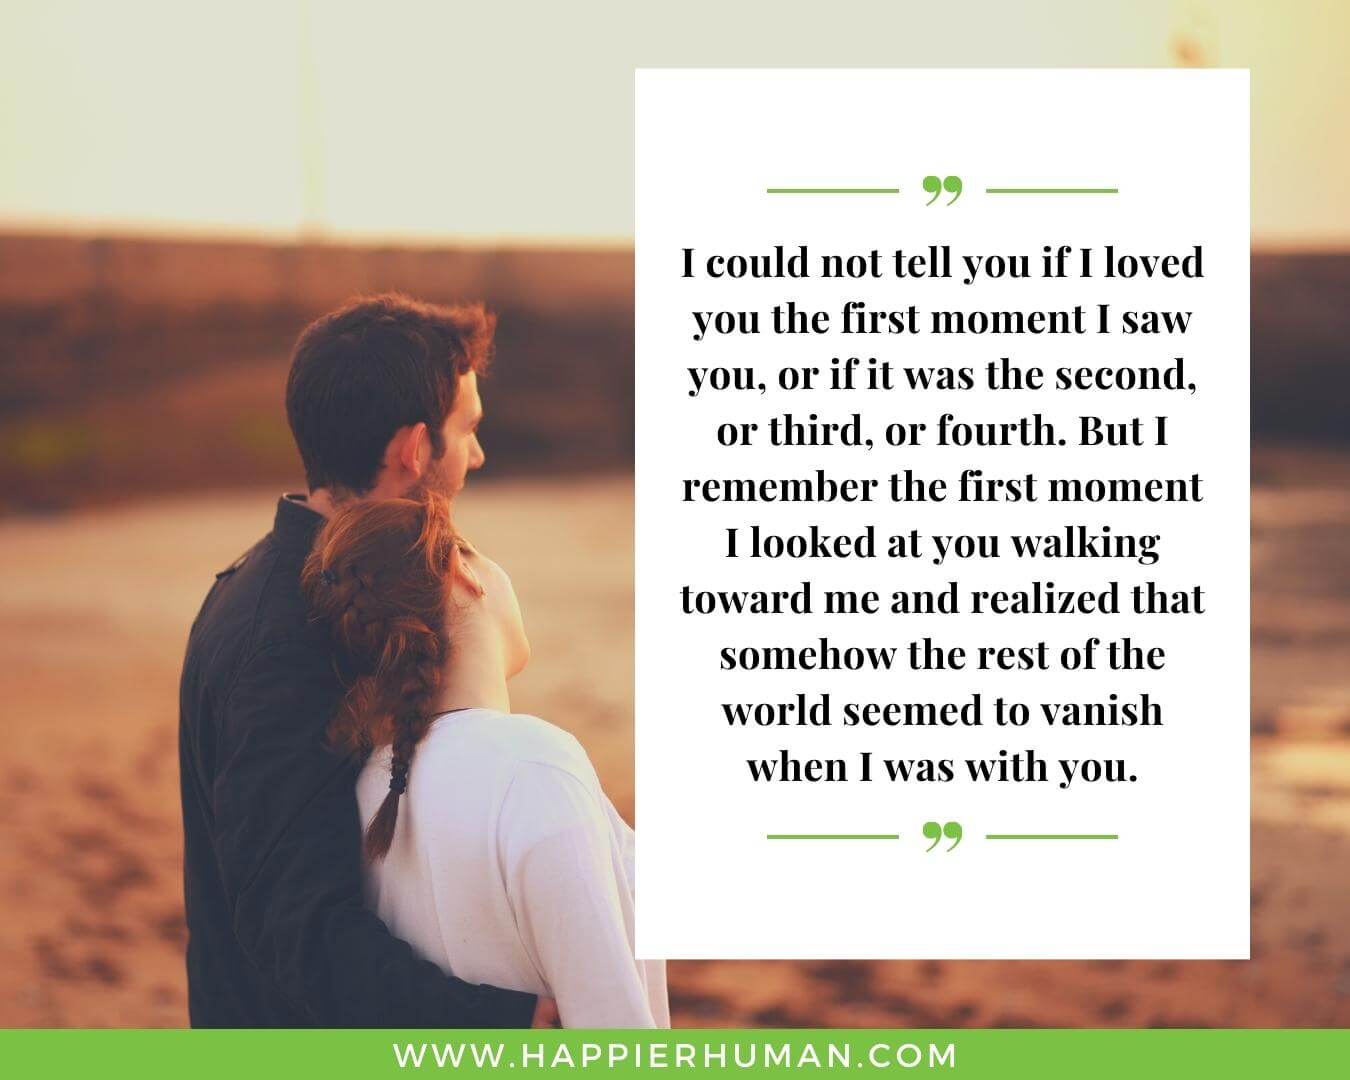 Unconditional Love Quotes for Her - “I could not tell you if I loved you the first moment I saw you, or if it was the second, or third, or fourth. But I remember the first moment I looked at you walking toward me and realized that somehow the rest of the world seemed to vanish when I was with you.”